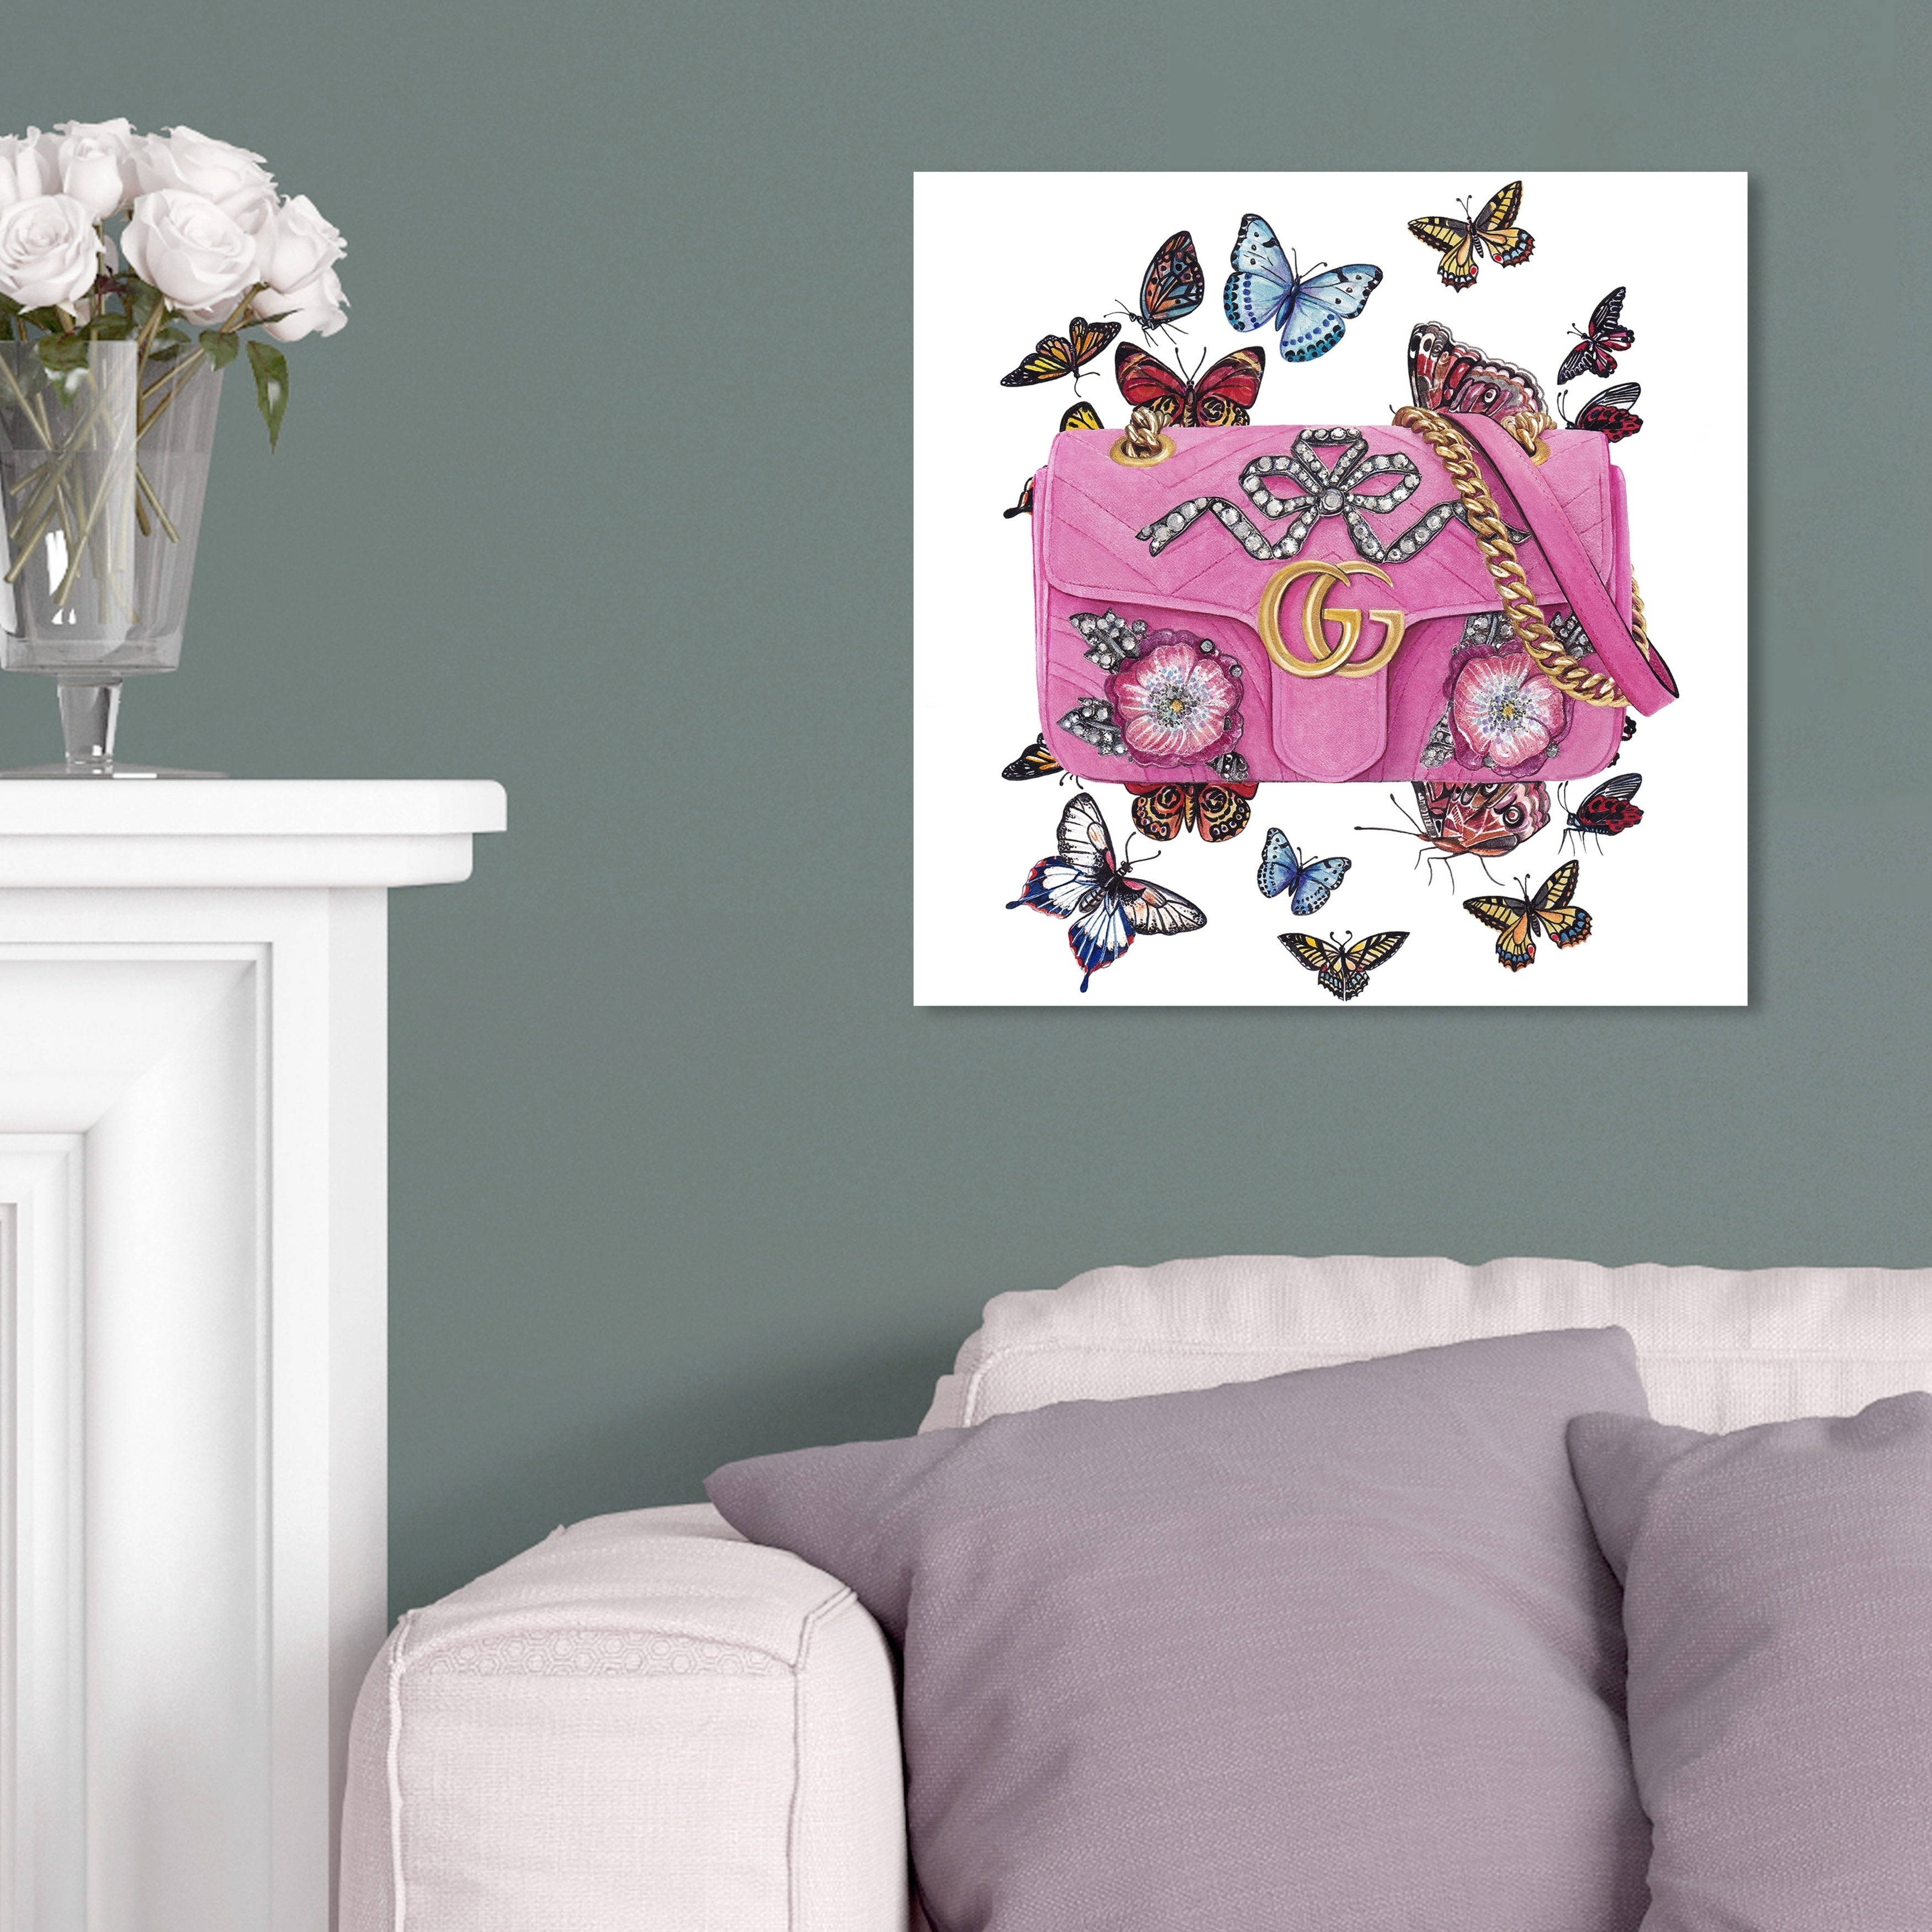 Oliver Gal 'Doll Memories - Butterfly Bag' Fashion and Glam Wall Art Canvas  Print - Pink, Gold